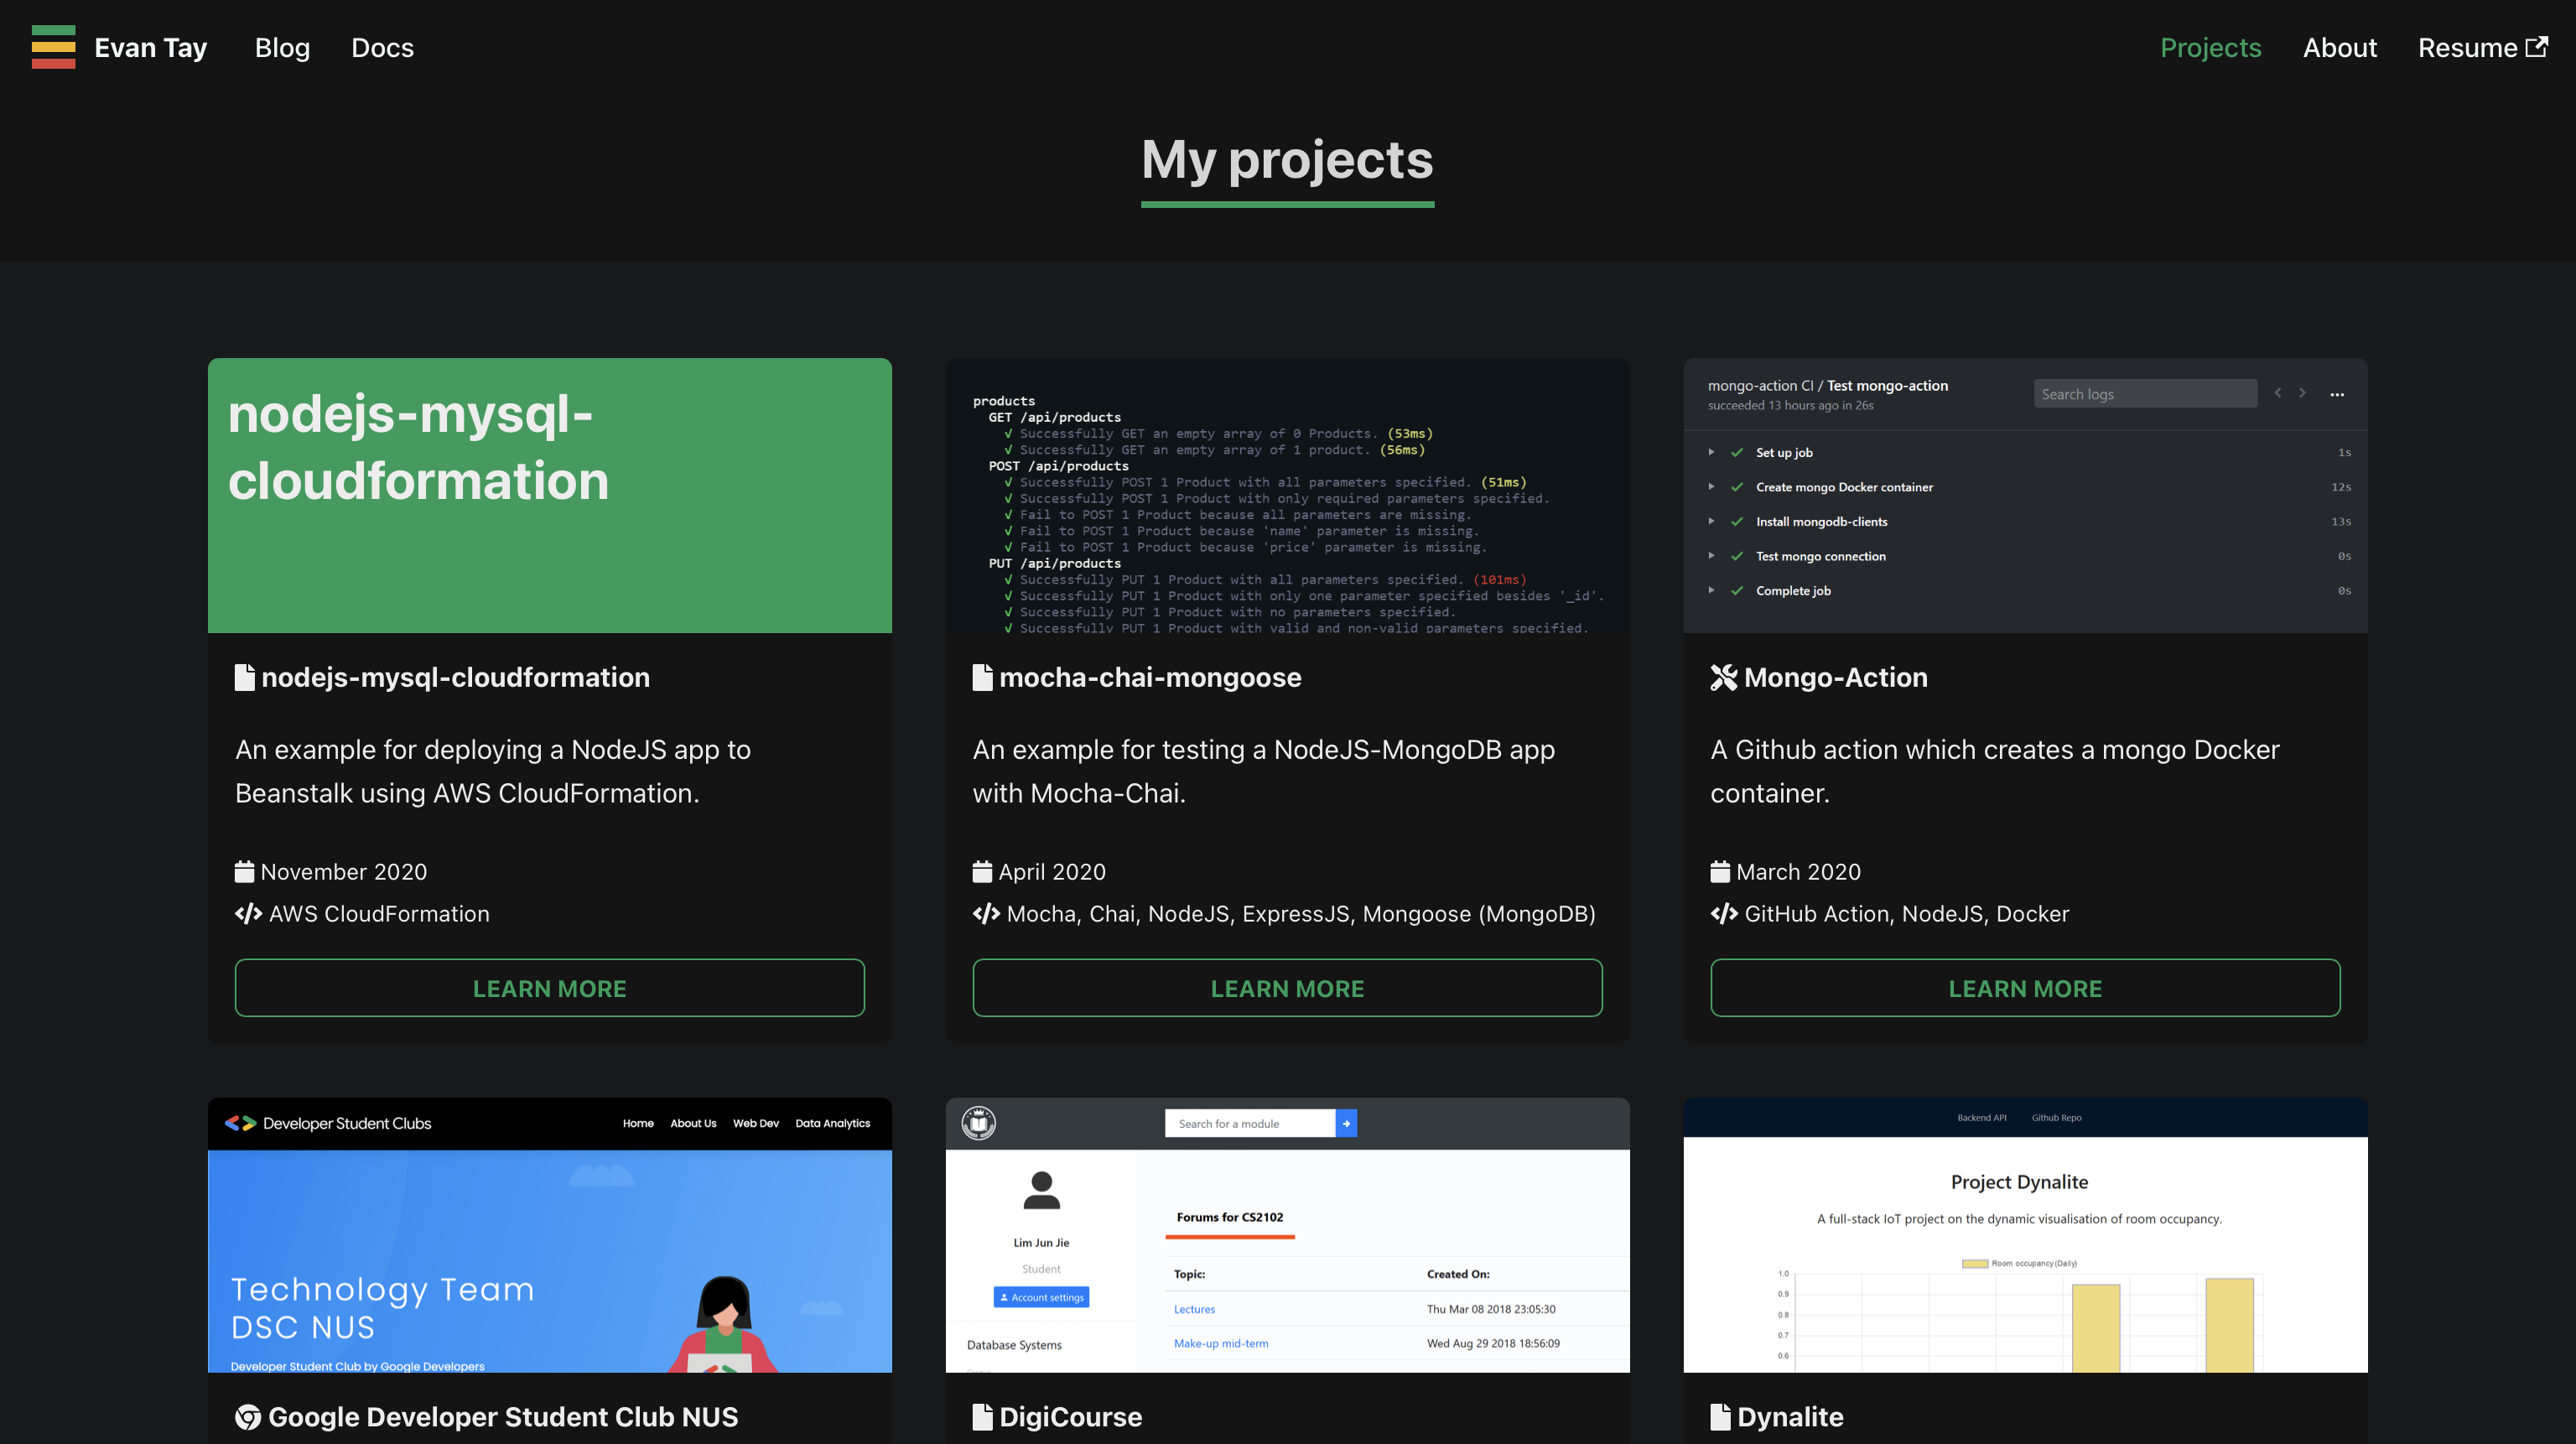 Projects page